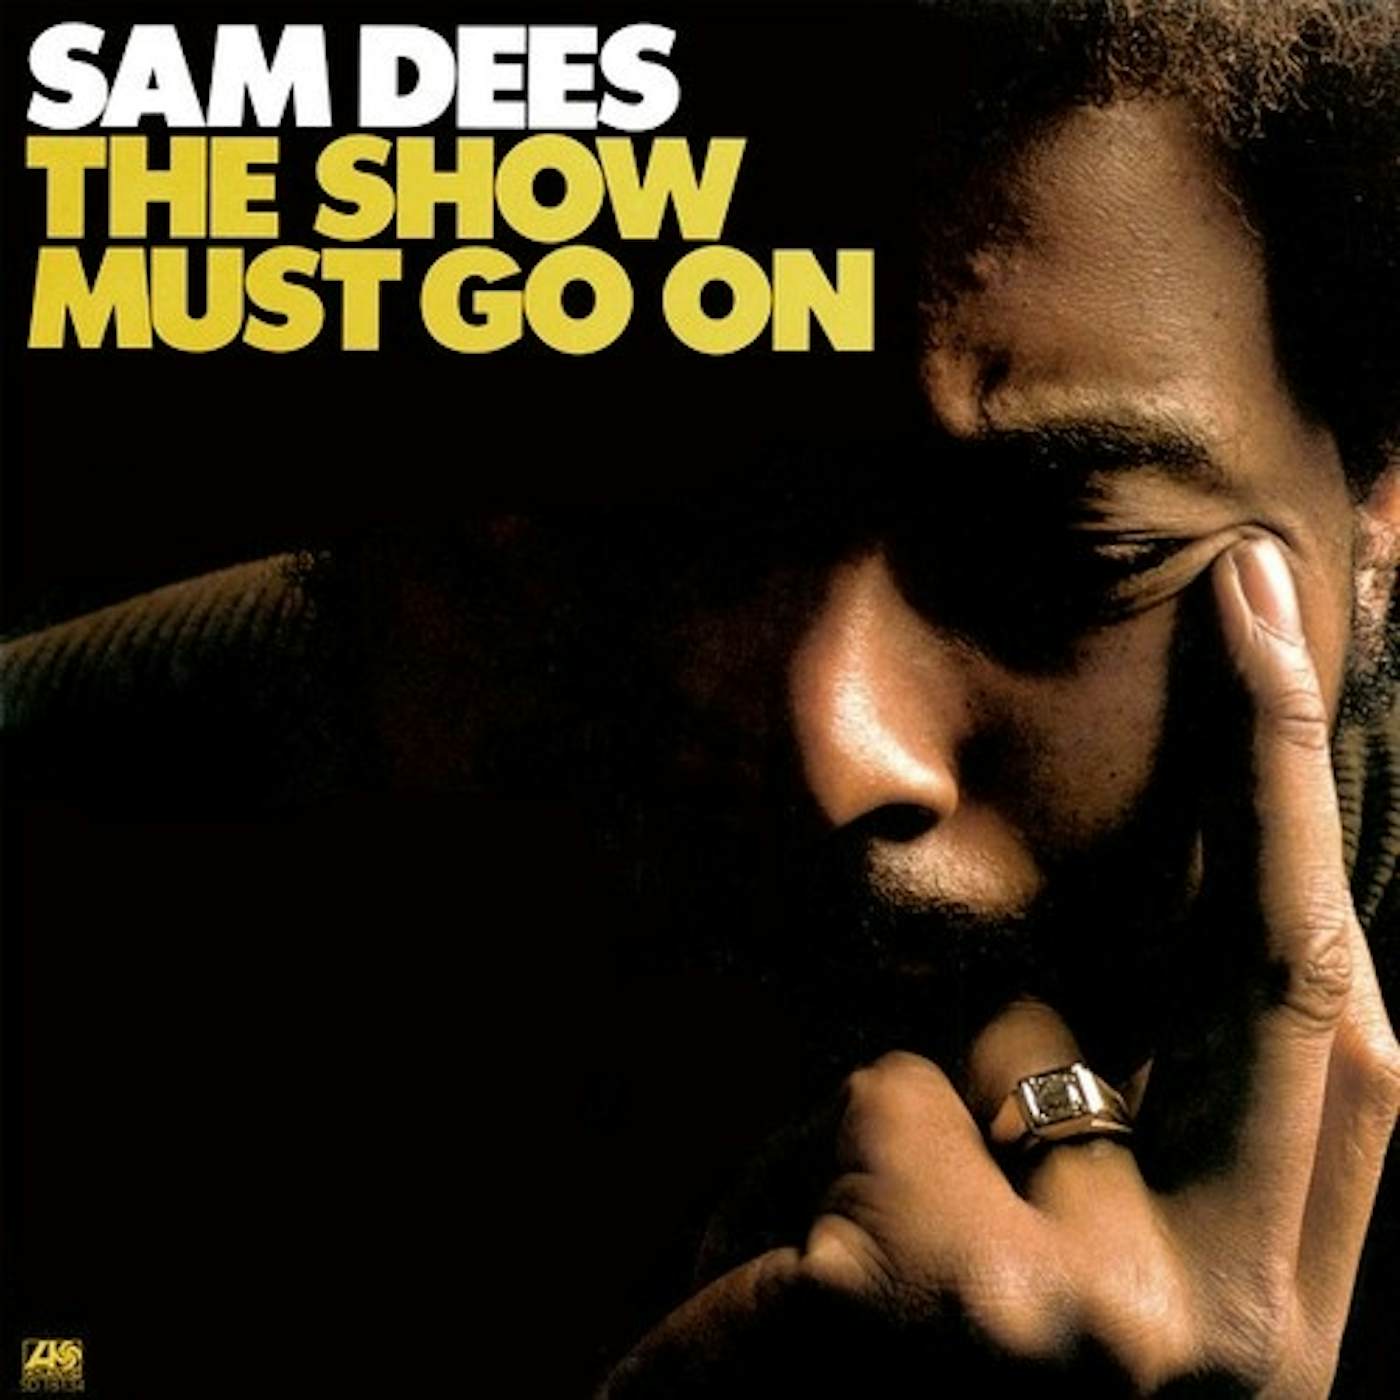 Sam Dees SHOW MUST GO ON Vinyl Record